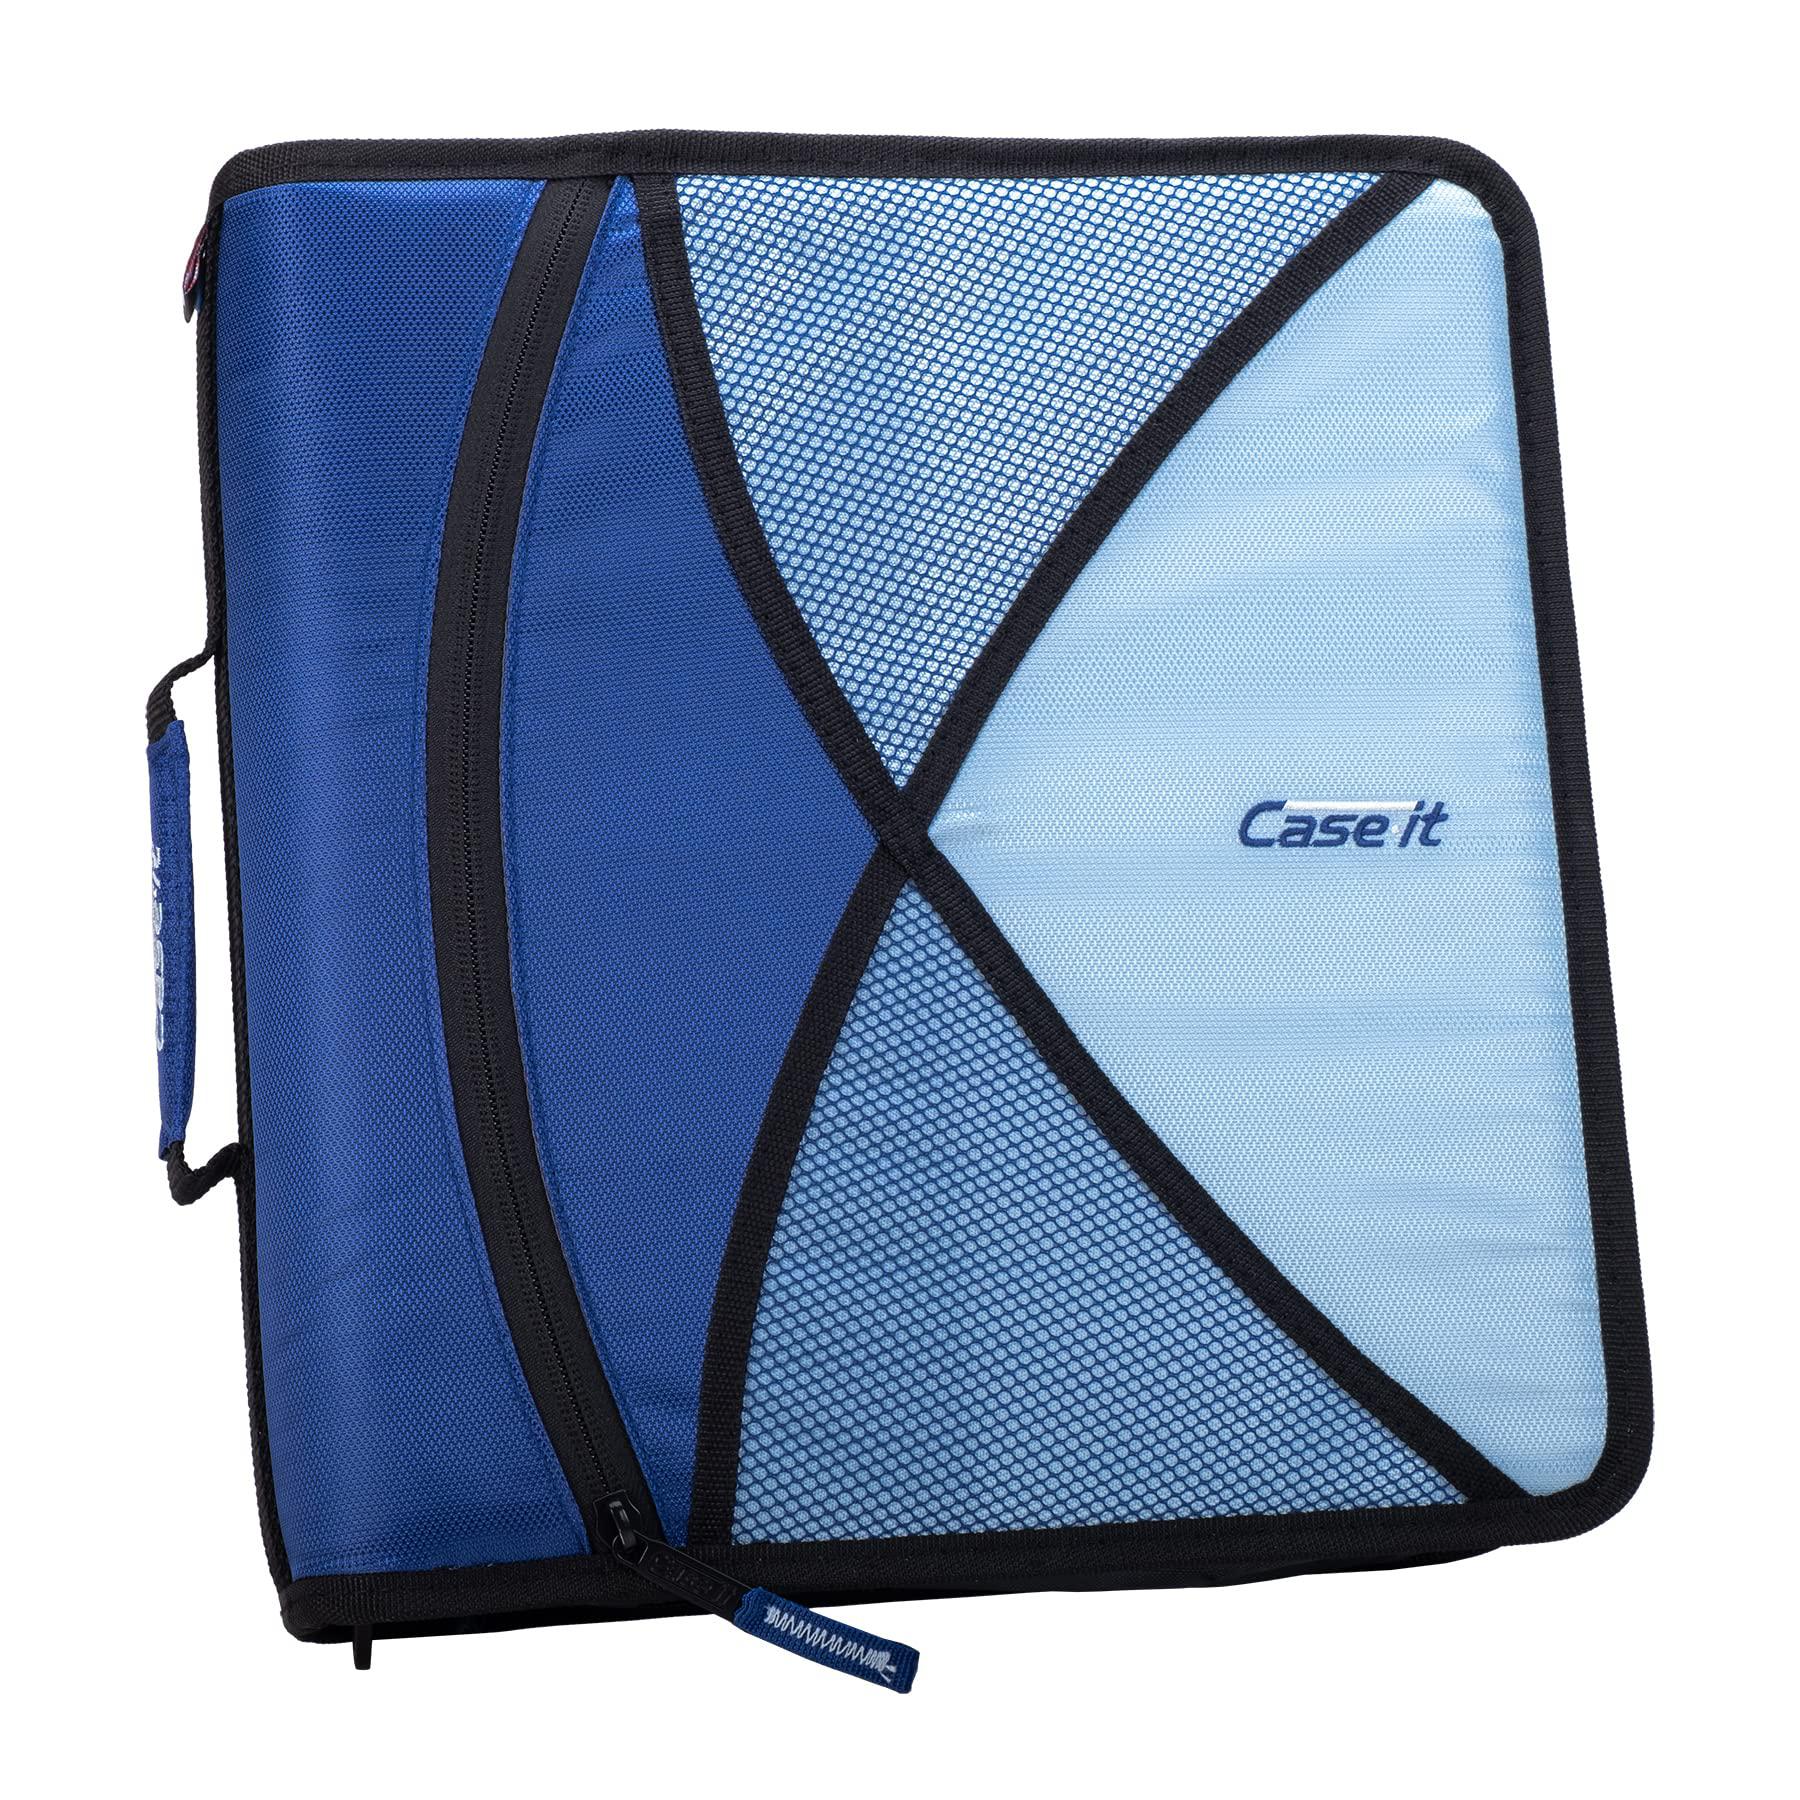 Case It case-it the dual 2-in-1 zipper binder - two 1.5 inch d-rings - includes pencil pouch - multiple pockets - 600 sheet capacity 